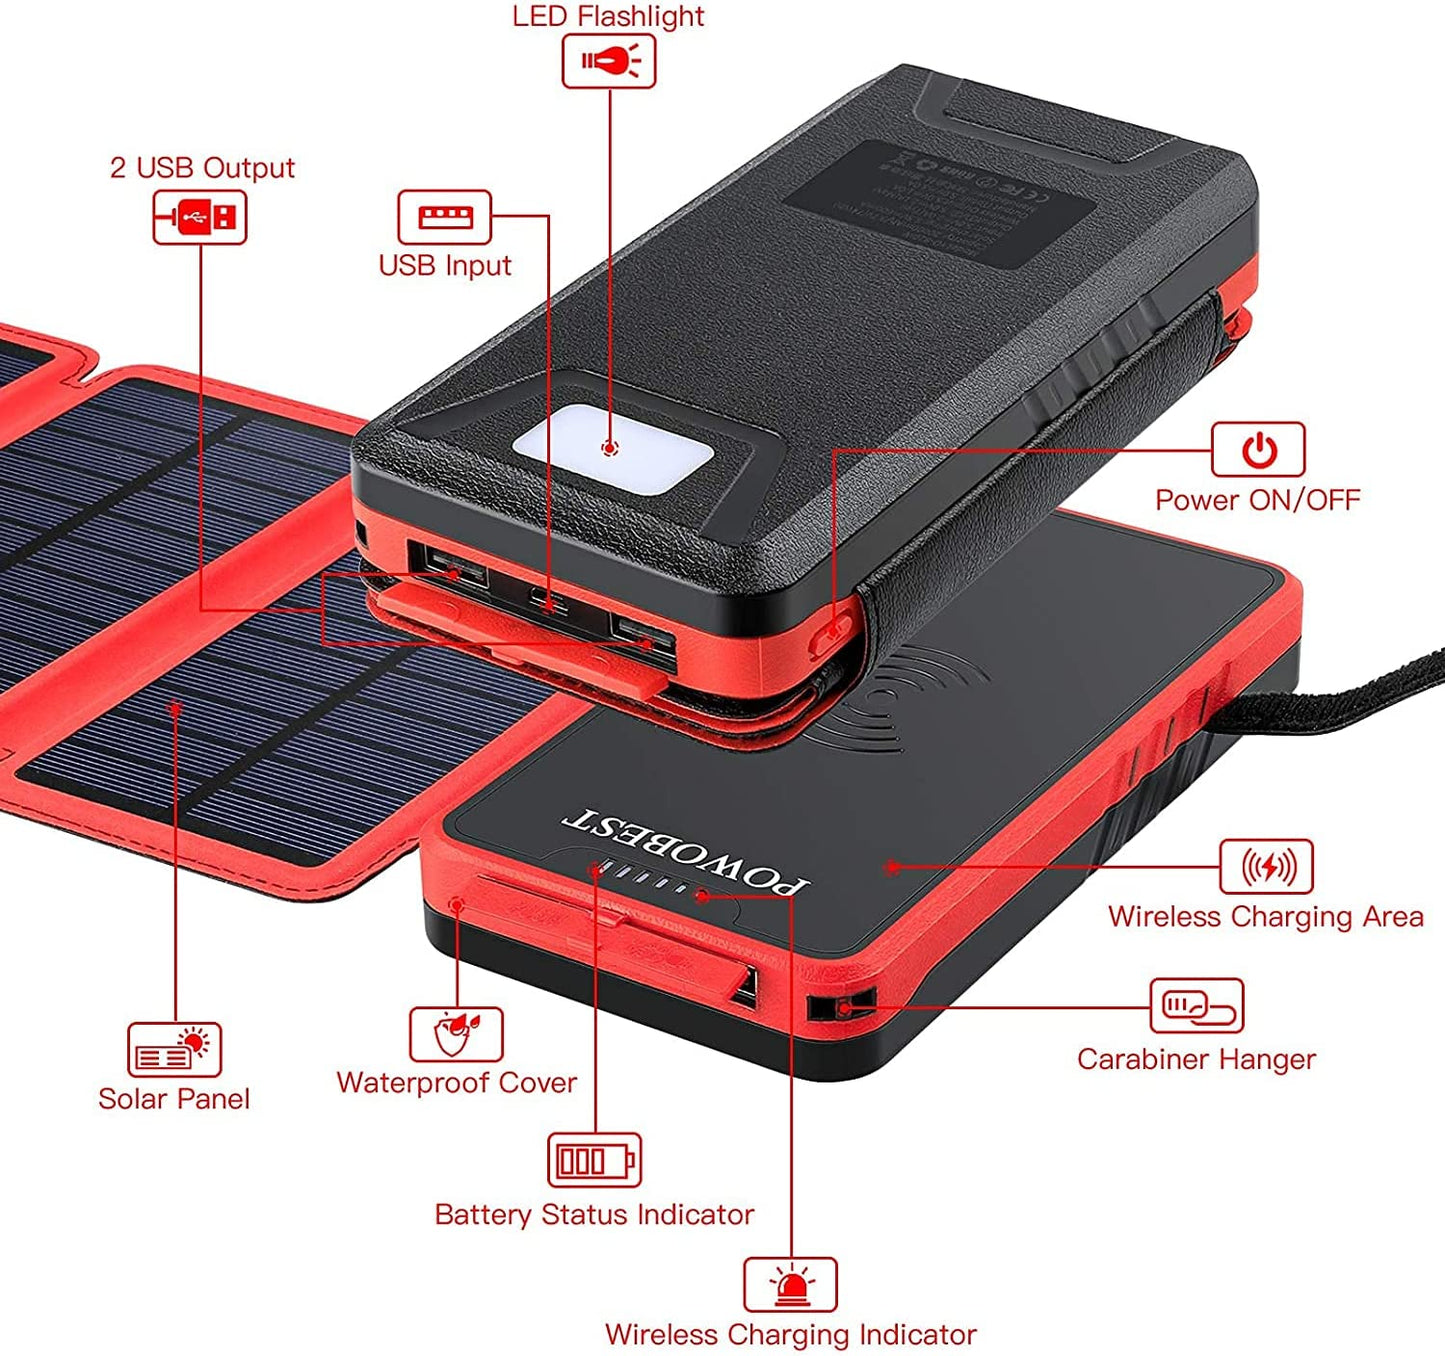 Solar Phone Charger,Solar Charger Power Bank,Outdoor Solar Cellphone Power Bank,High-Speed Charging，Portable Power Bank，20000Mah Wireless Portable Solar Power Bank,Solar Panel Charging(Red)